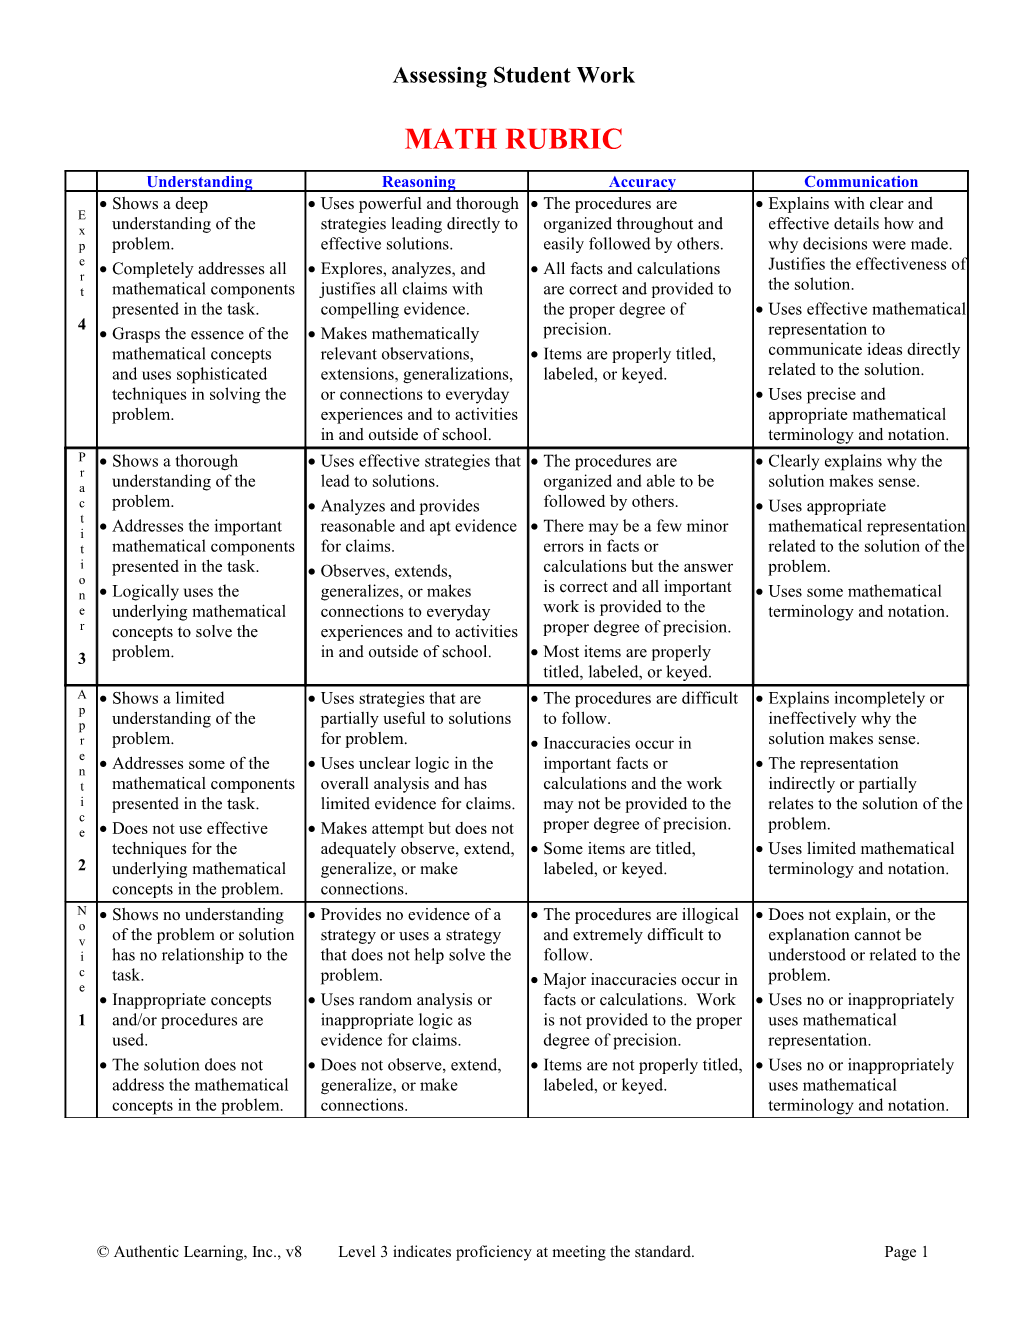 MATH PICTURE RUBRIC Expert Level 4